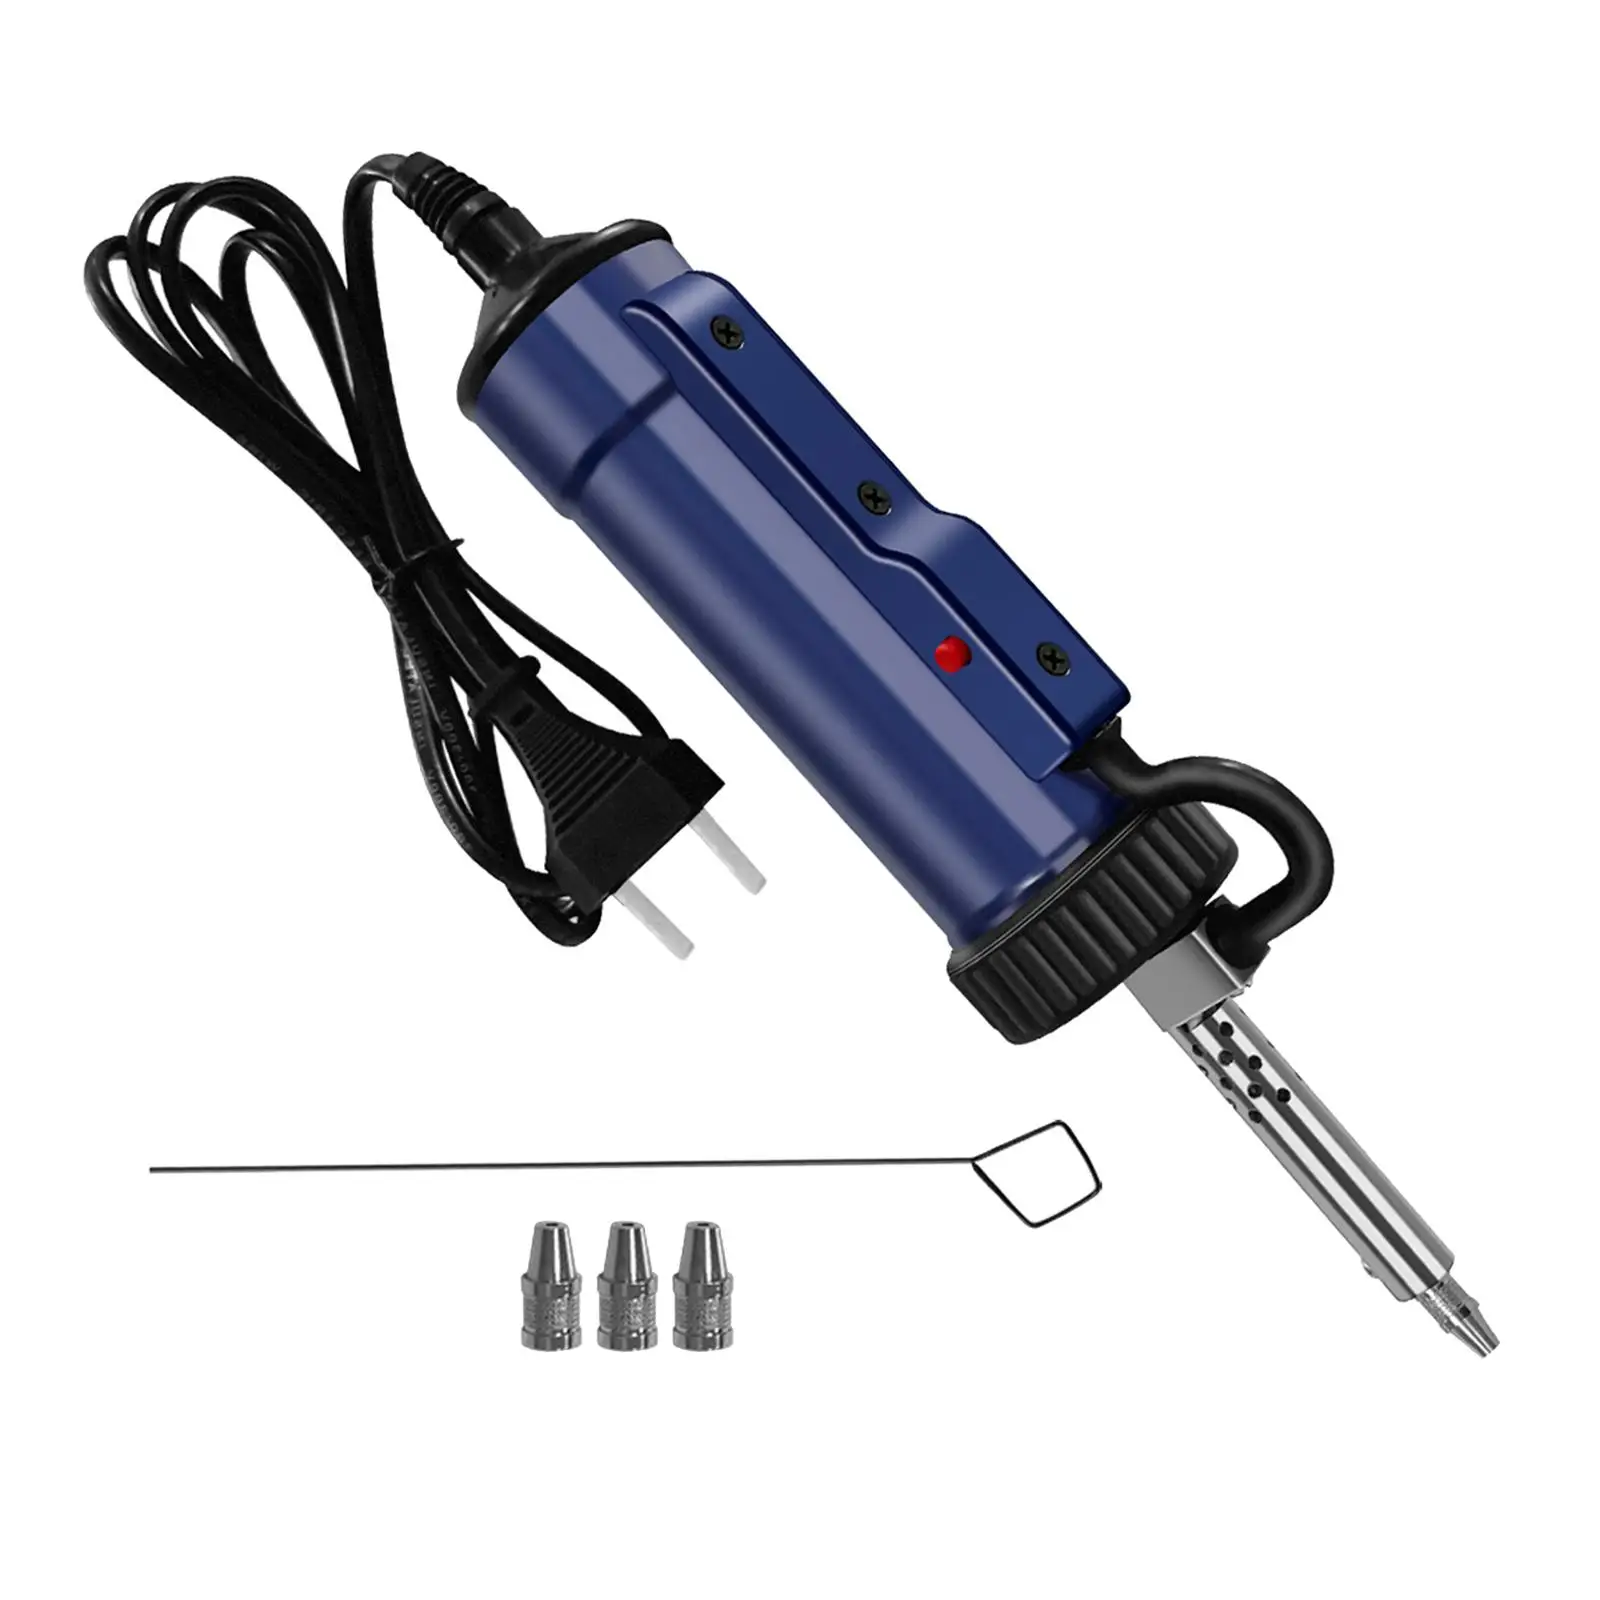 Handheld Solder Removal Tool Electric Solder Tin suckers for Appliance Repair